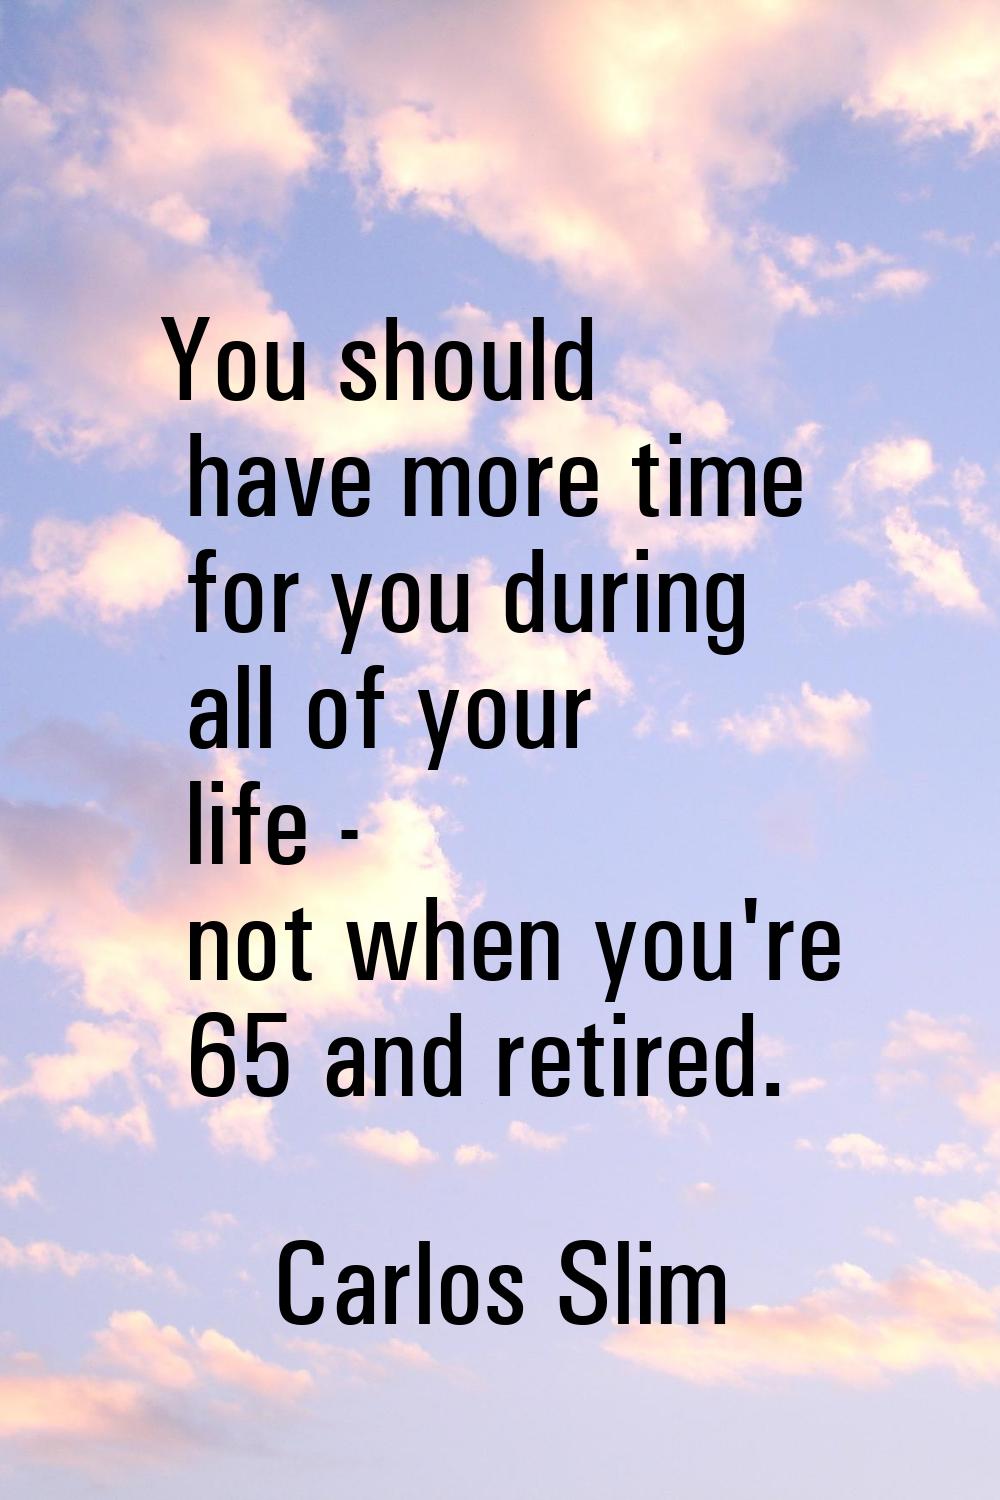 You should have more time for you during all of your life - not when you're 65 and retired.